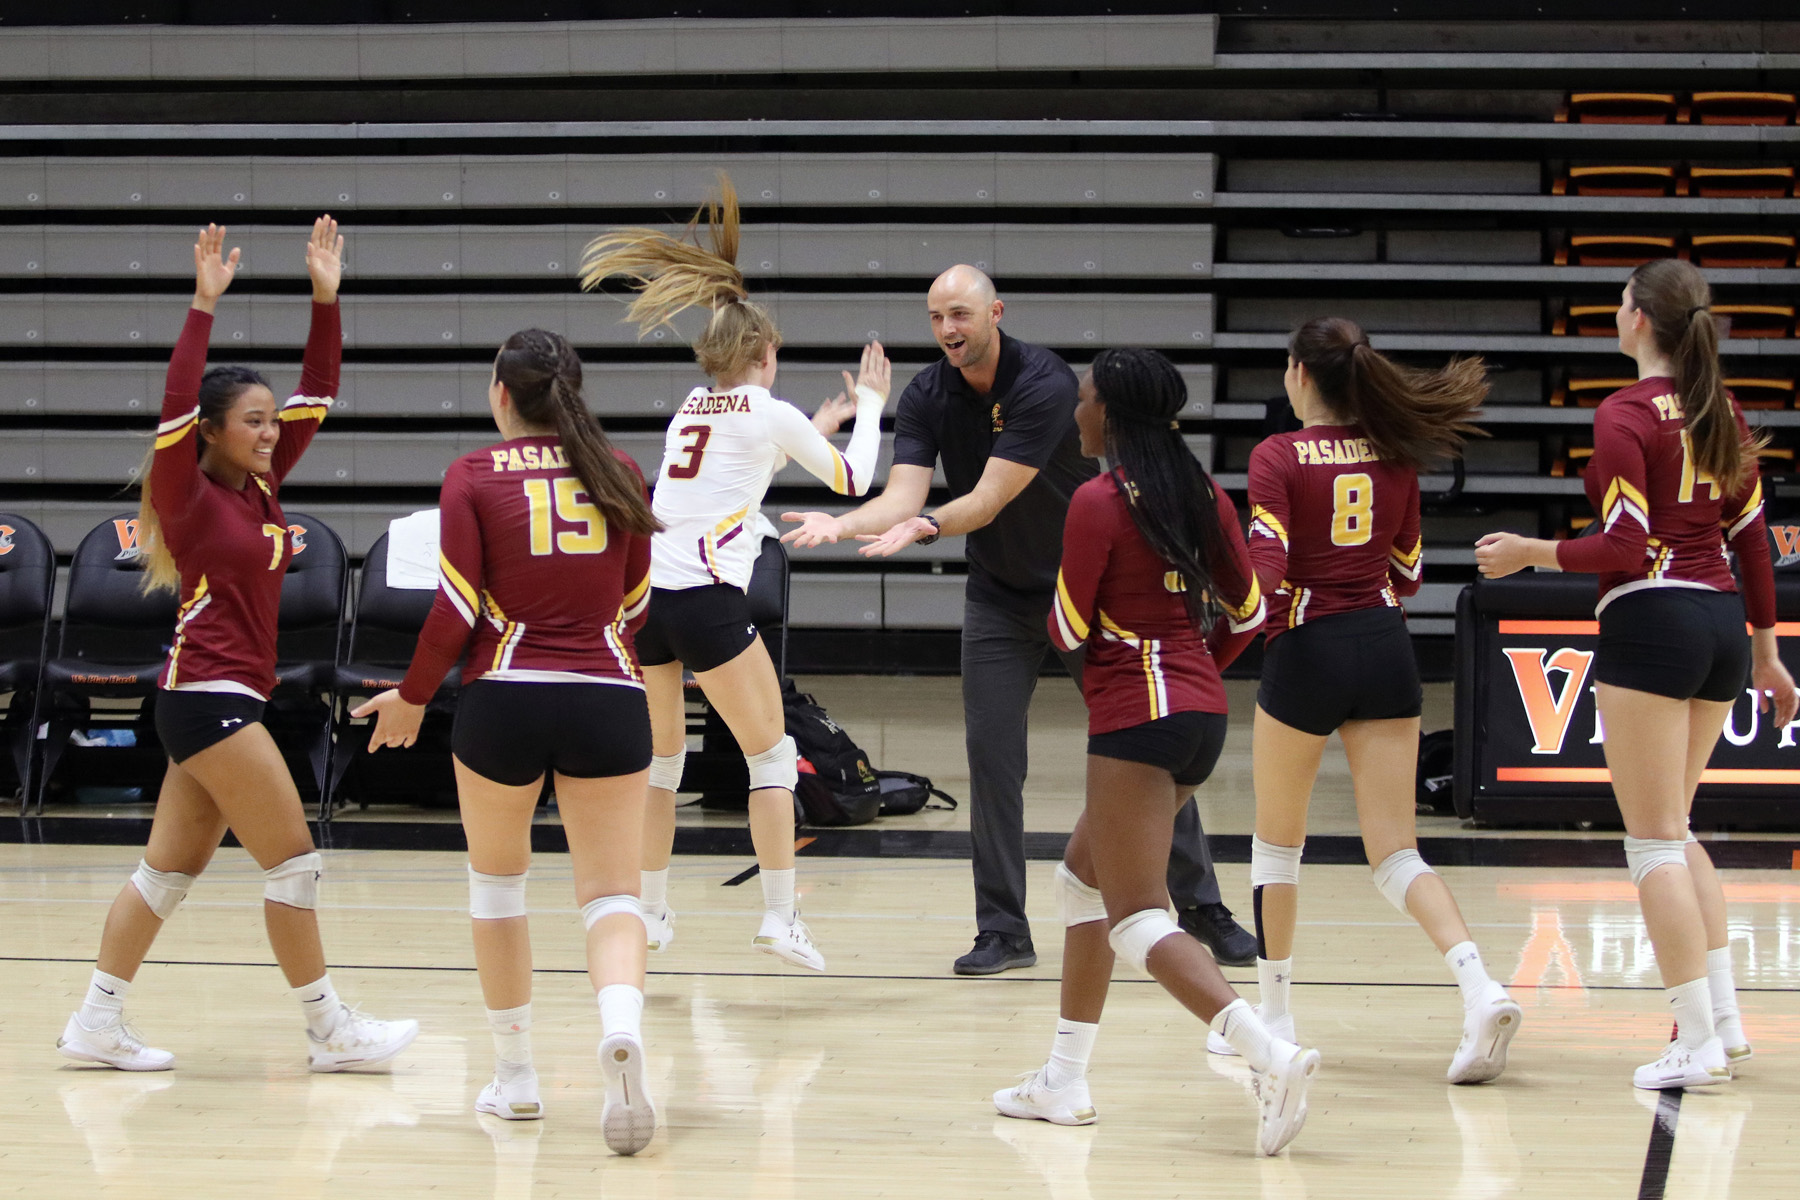 Pasadena City College is right now the hottest women's volleyball team in the South Coast Conference at 6-1 and ranked No. 9 in the state.